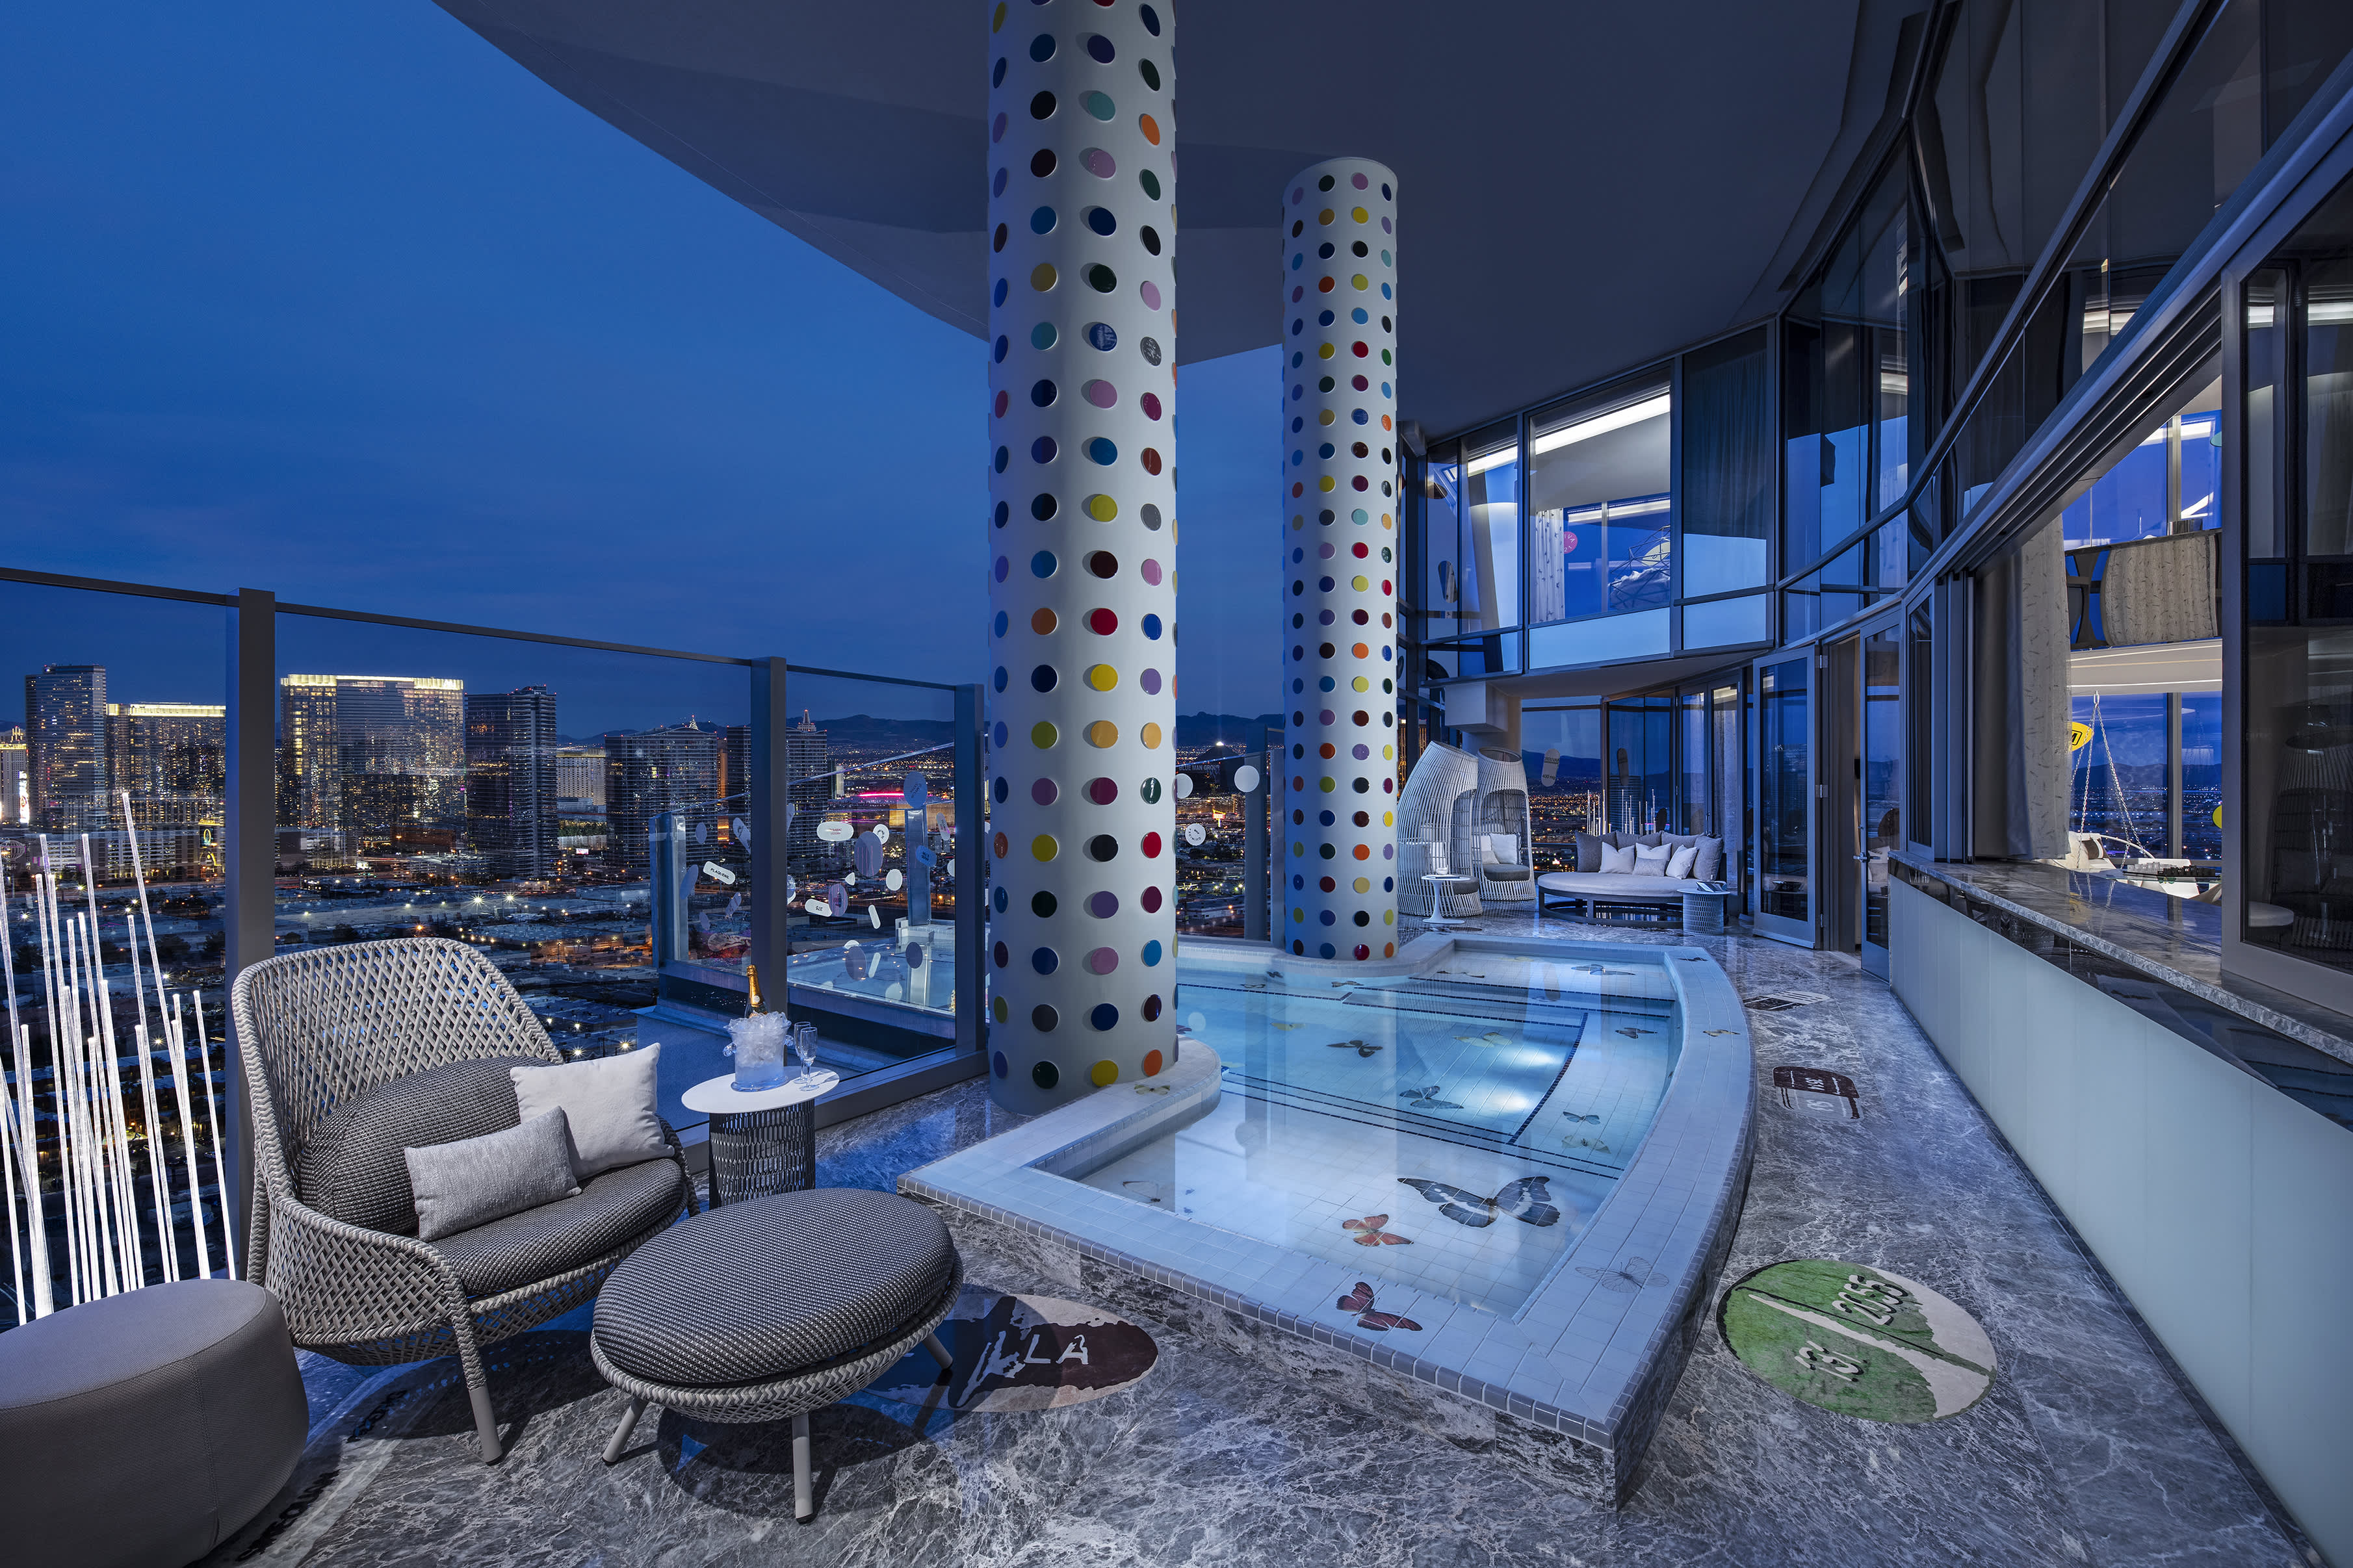 Photos Palms Casino Resort Has One Of World S Most Expensive Suites